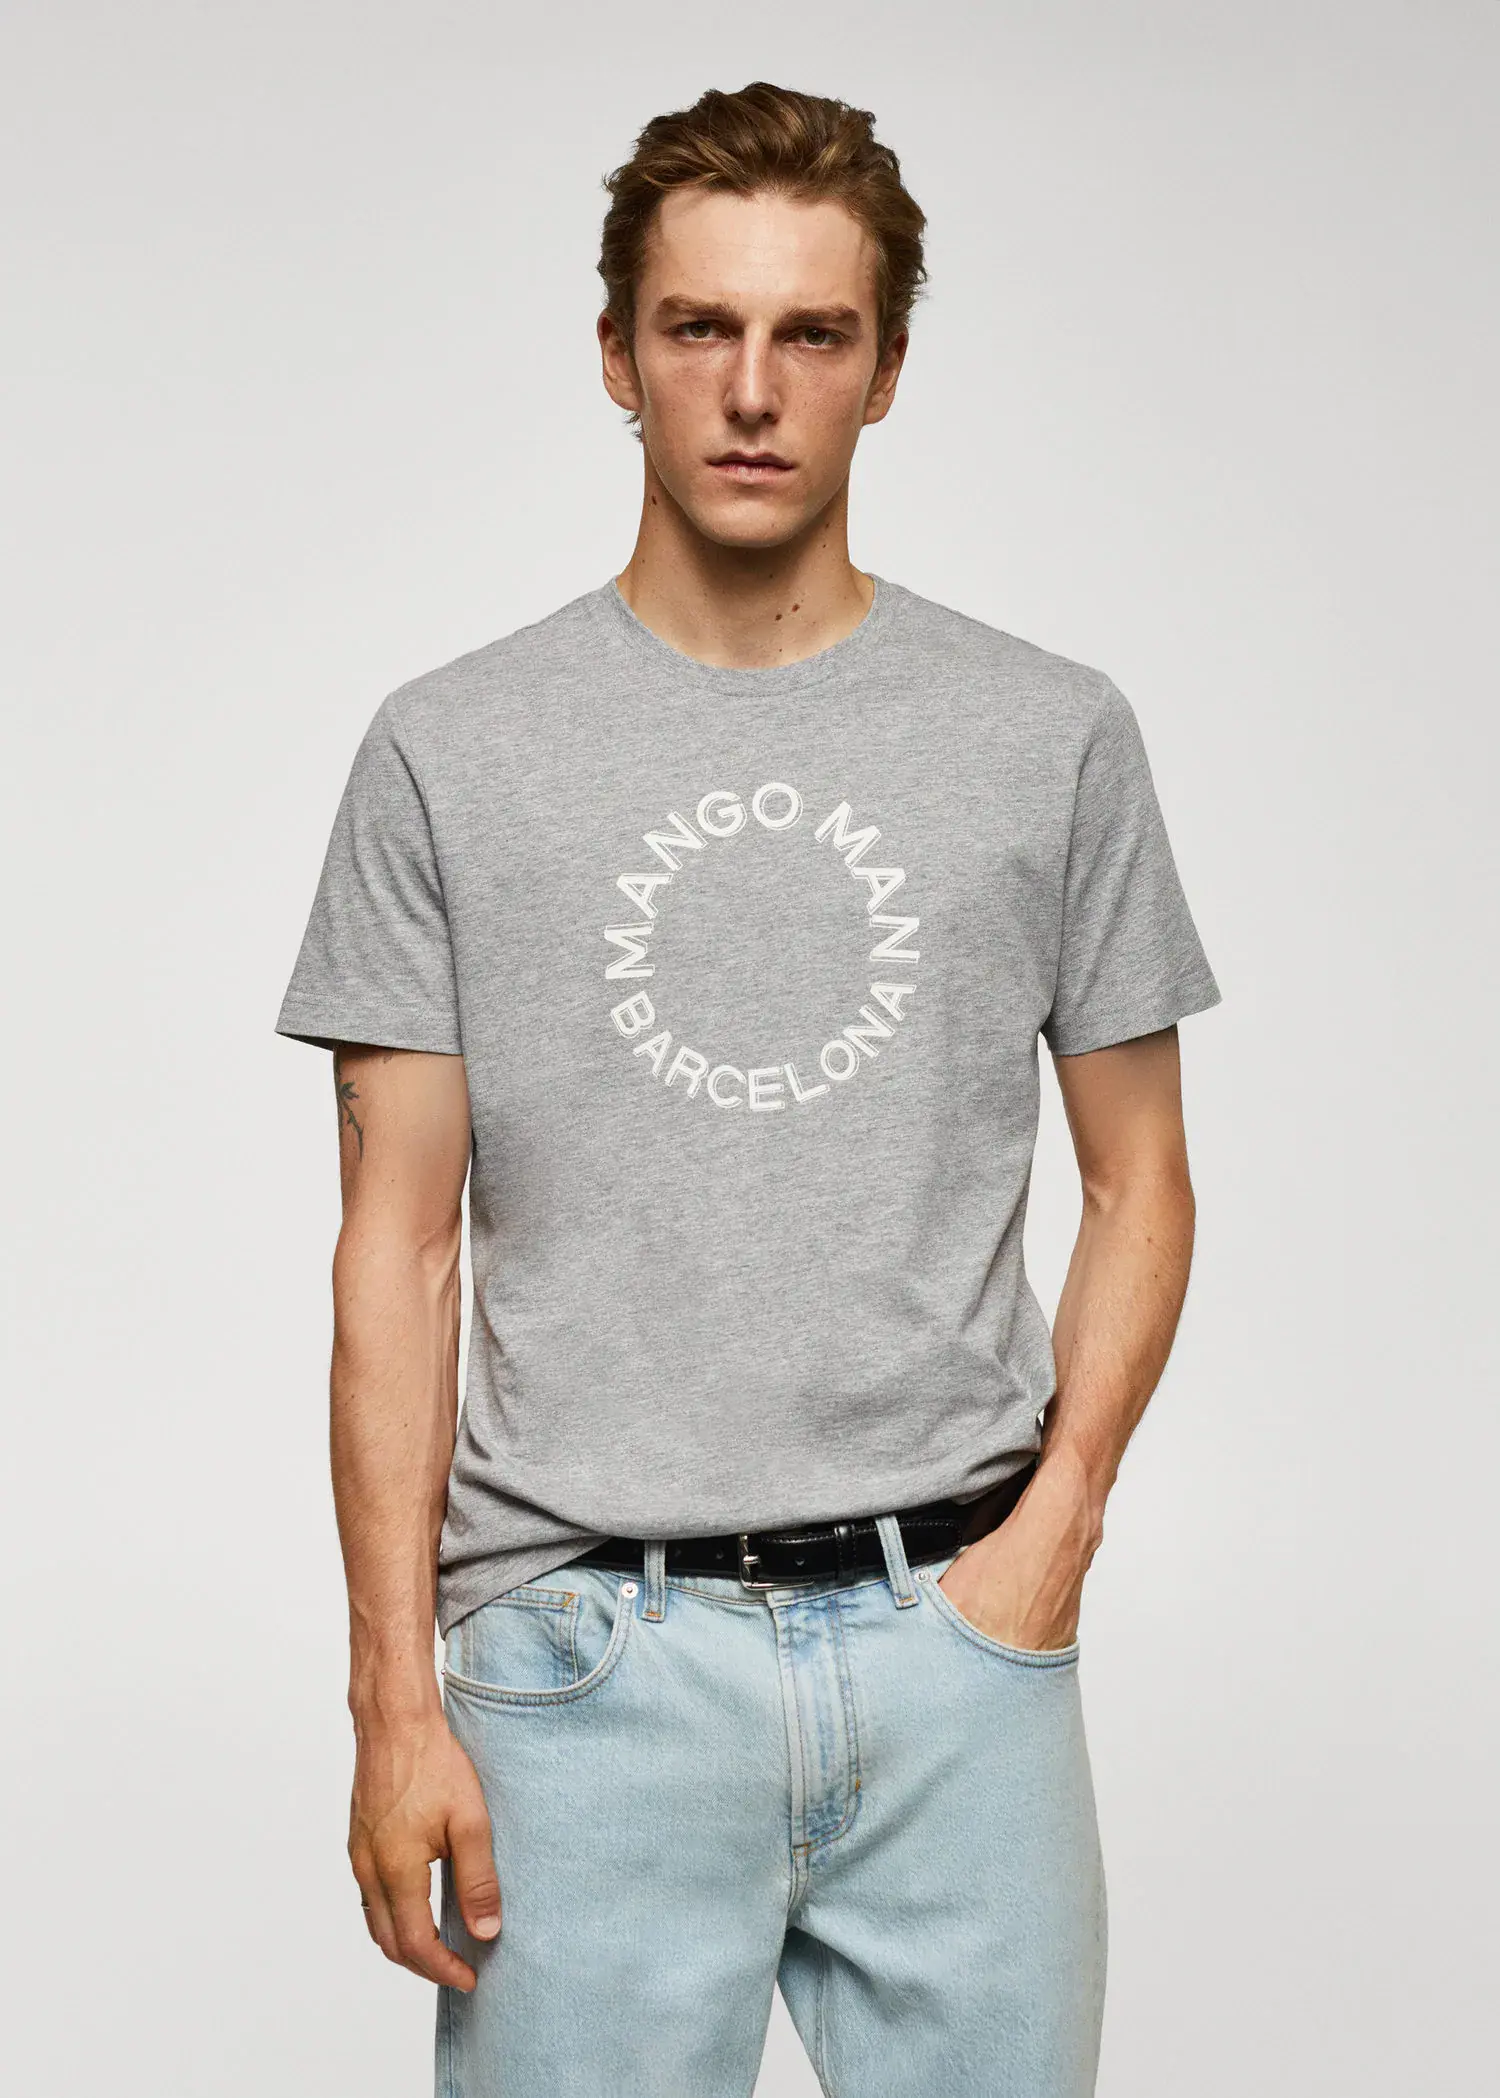 Mango 100% cotton t-shirt with logo. a man in a gray t-shirt and blue jeans. 